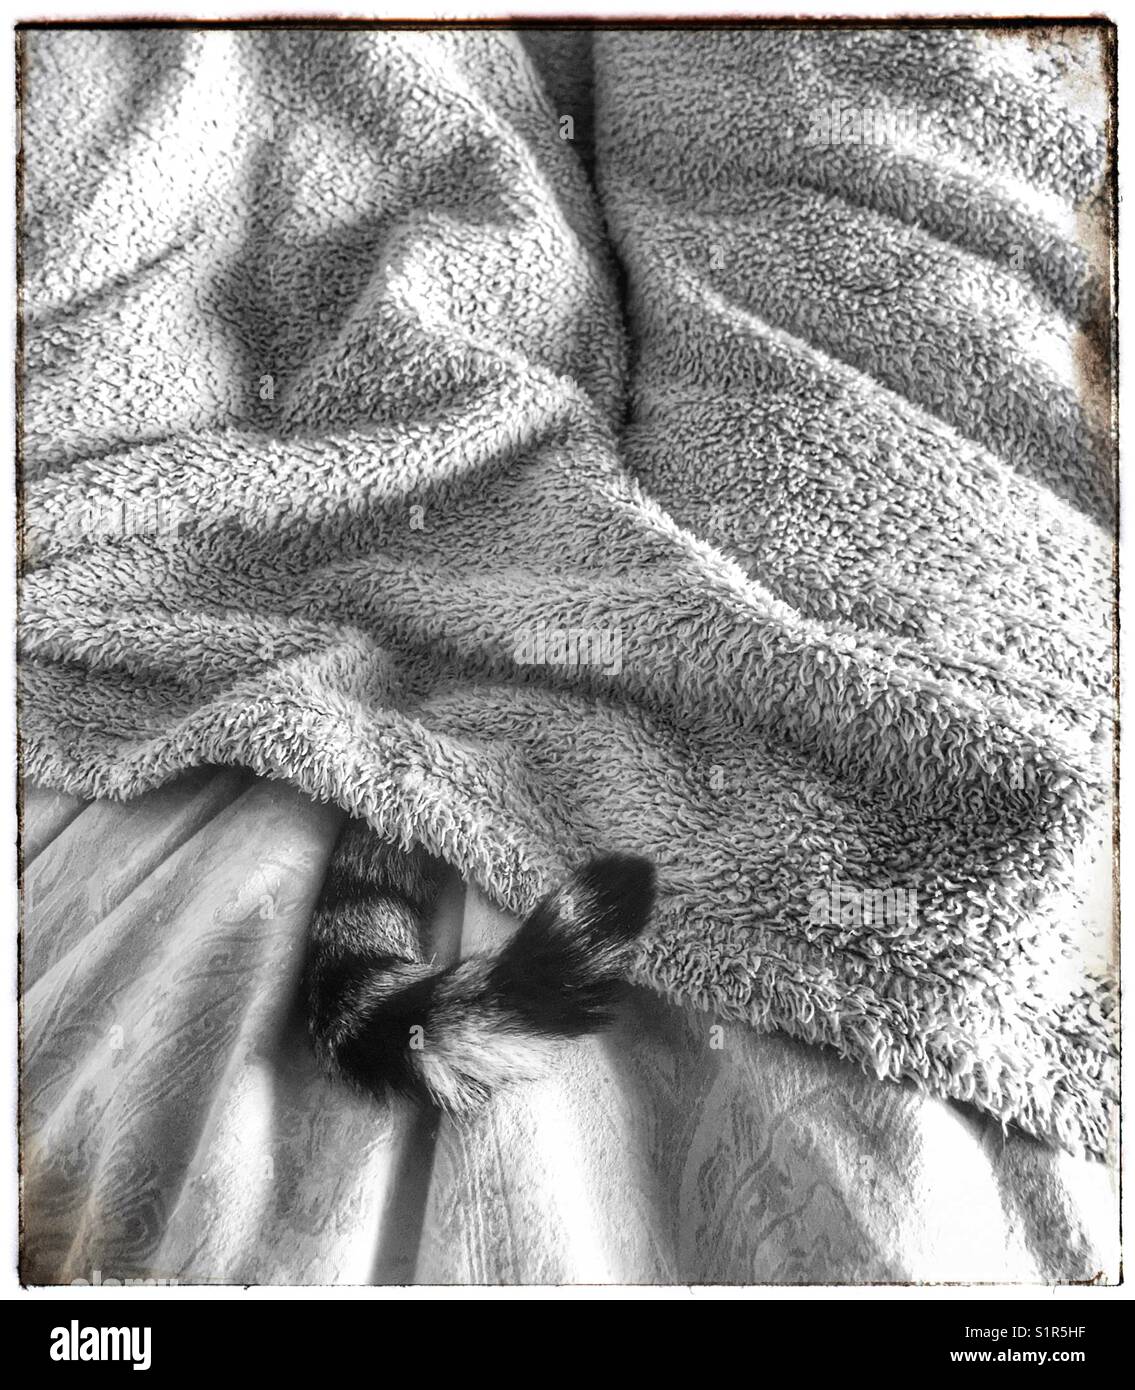 Cat’s tail sticking out from under blanket. Stock Photo